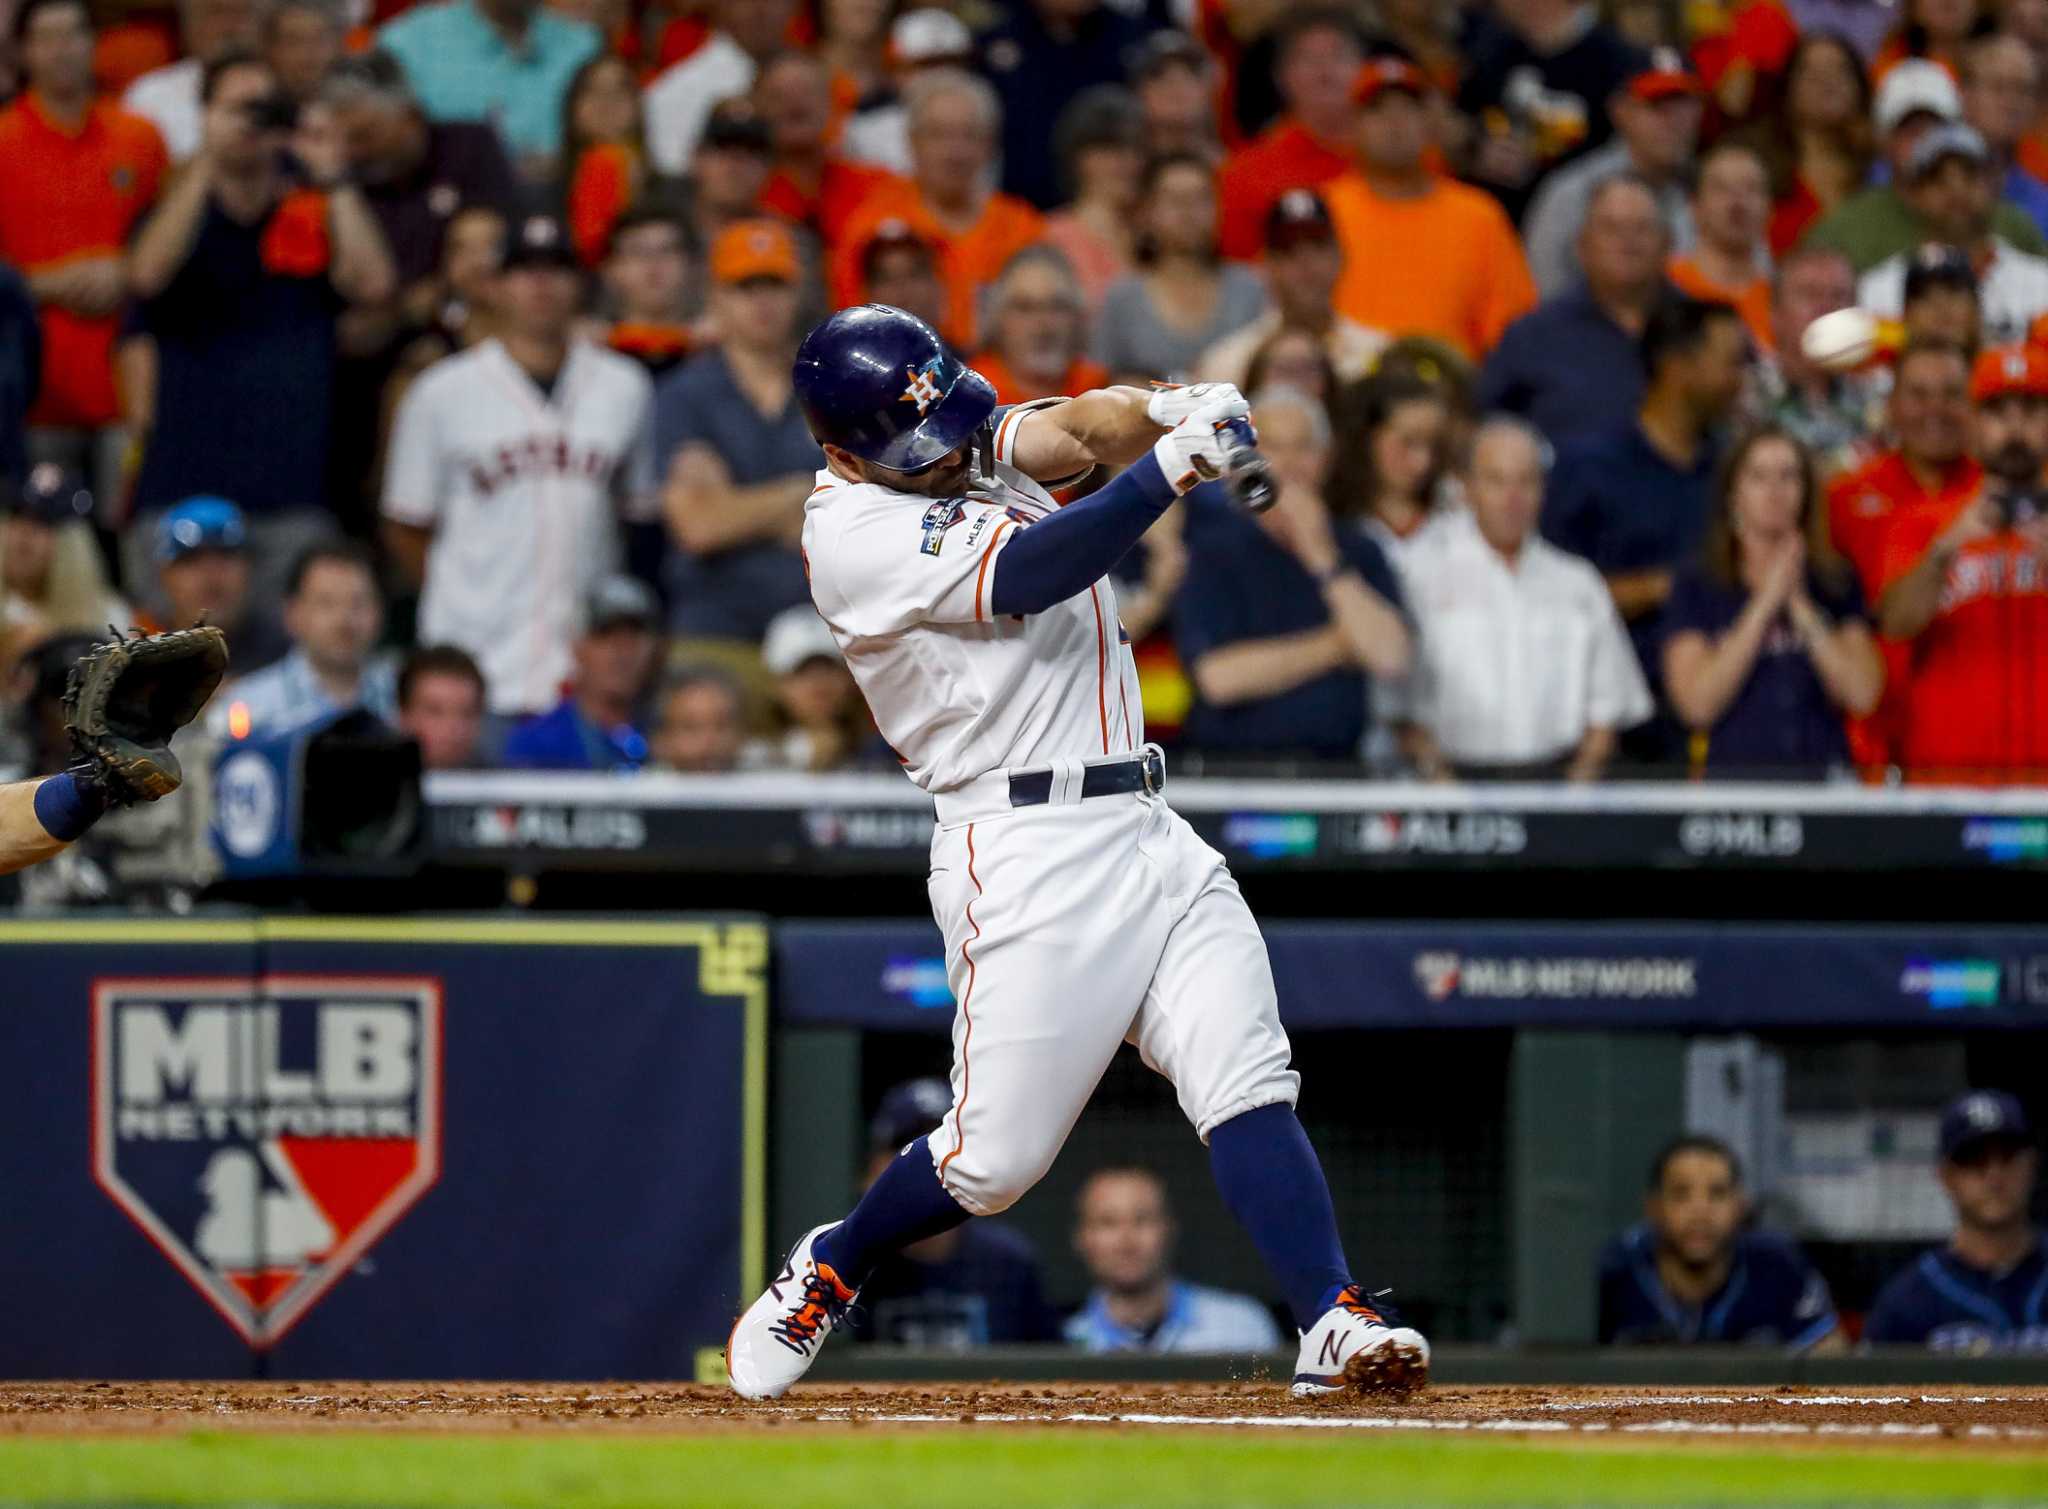 Jose Altuve's hitting is art, but it's science, too